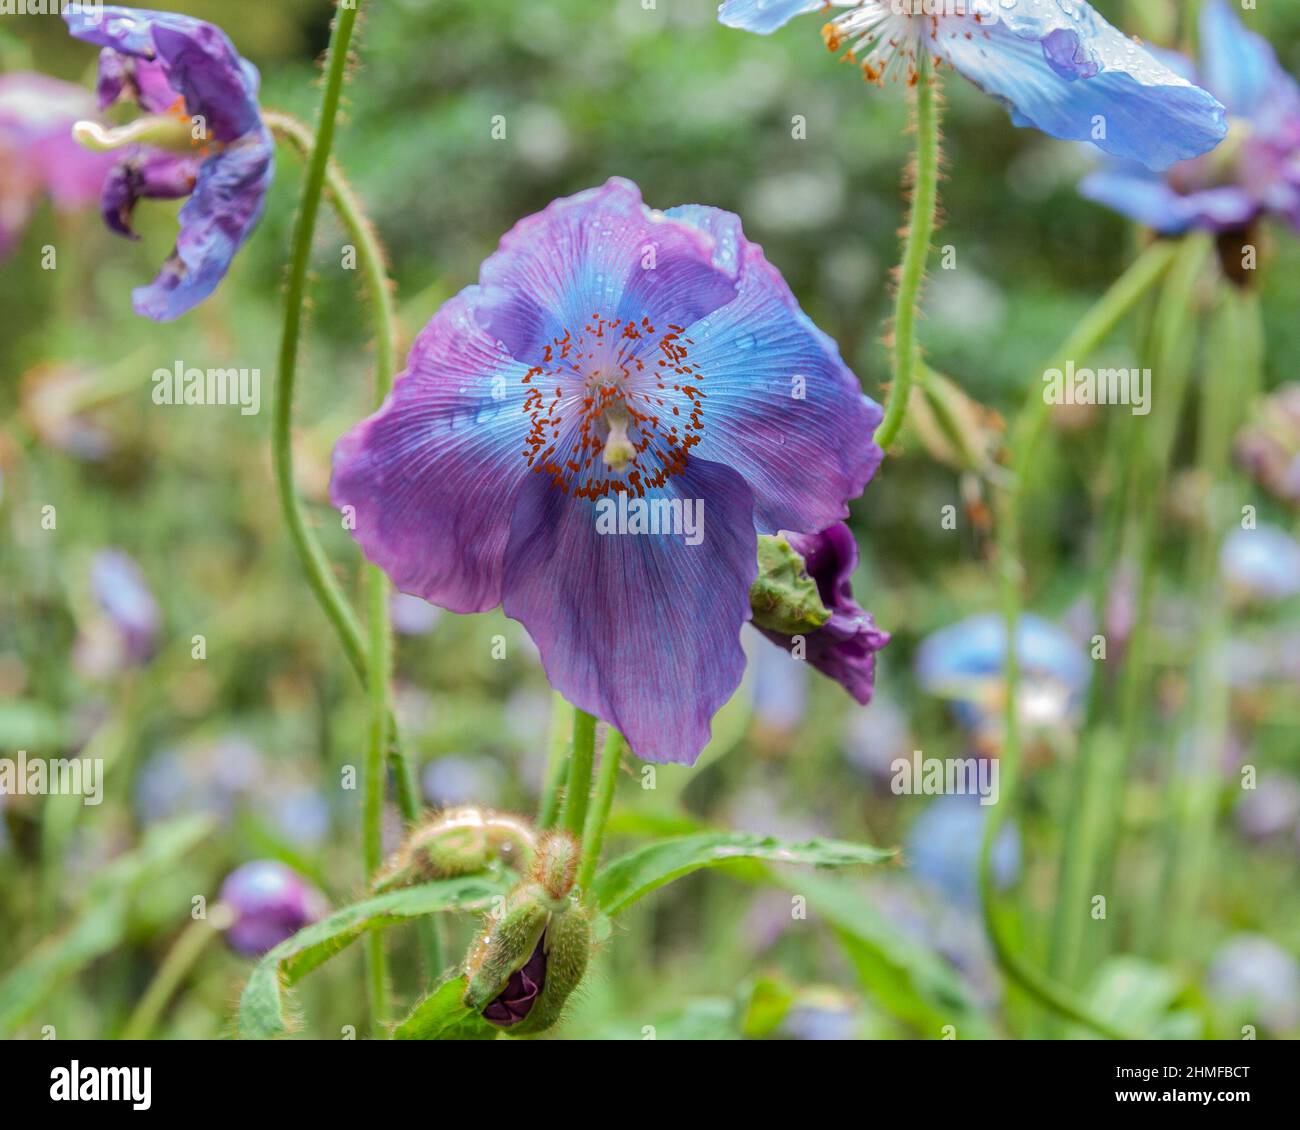 A Blue Himalayan Poppy, Meconopsis, which has purple tones, growing amongst a mixture of sky blue and violet-purple flowers. Stock Photo